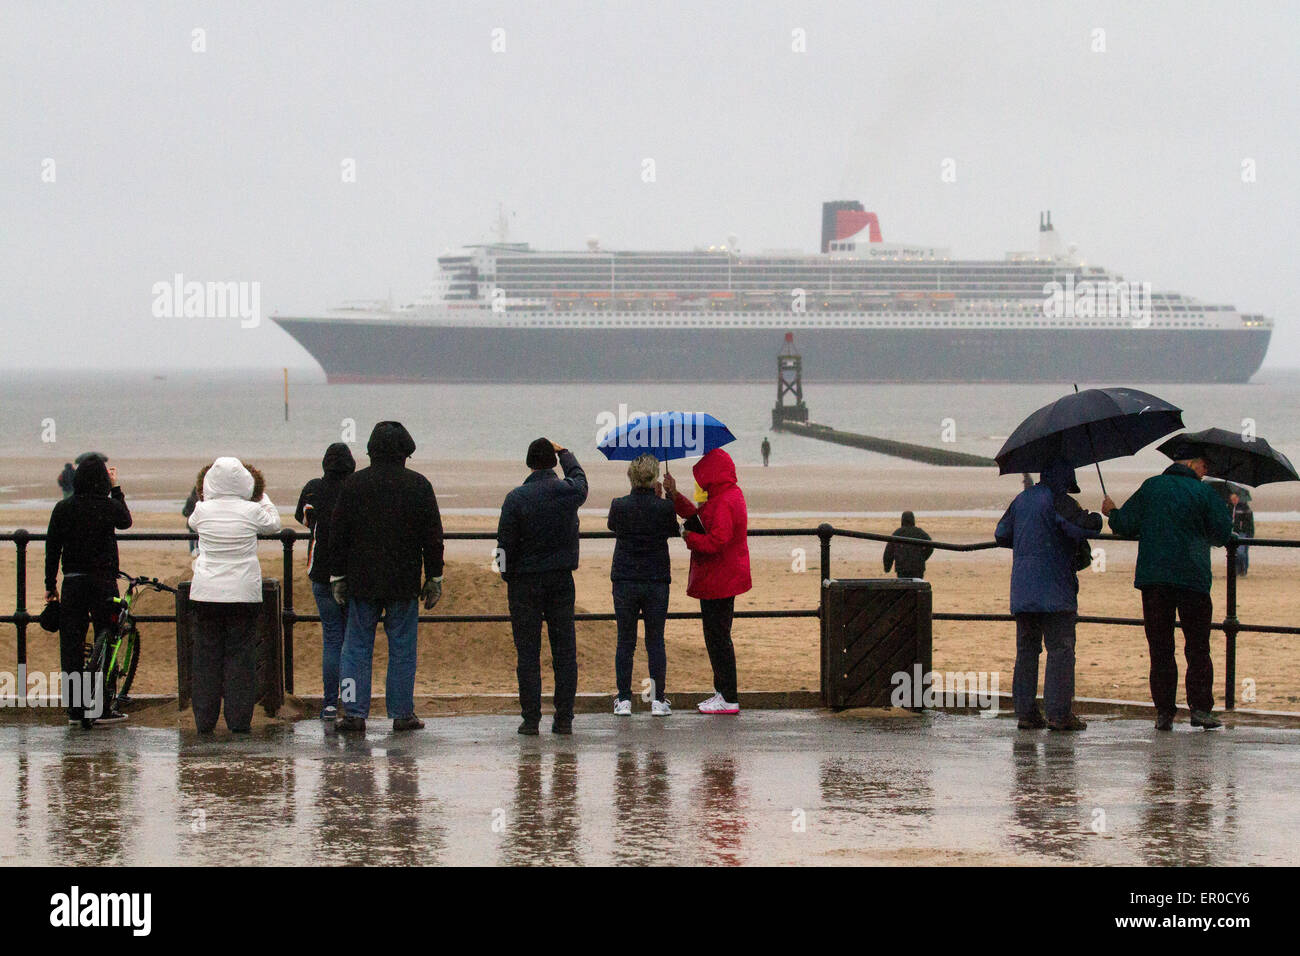 Liverpool, Merseyside, UK 24th May, 2015.  Cunard Queen Mary's arrival at dawn off Crosby Beach heralding the start of a stunning Three Queens celebration in the city. The flagship is the first of the company's three of luxury liners to arrive at Liverpool ahead of this Monday's celebrations which are expected to attract up to a million spectators. She will be joined by her two sister ships Queen Victoria and Queen Elizabeth in the following 24 hours for a sail past the city’s own three Queens to mark Cunard’s 175th birthday.  Credit:  Mar Photographics/Alamy Live News Stock Photo